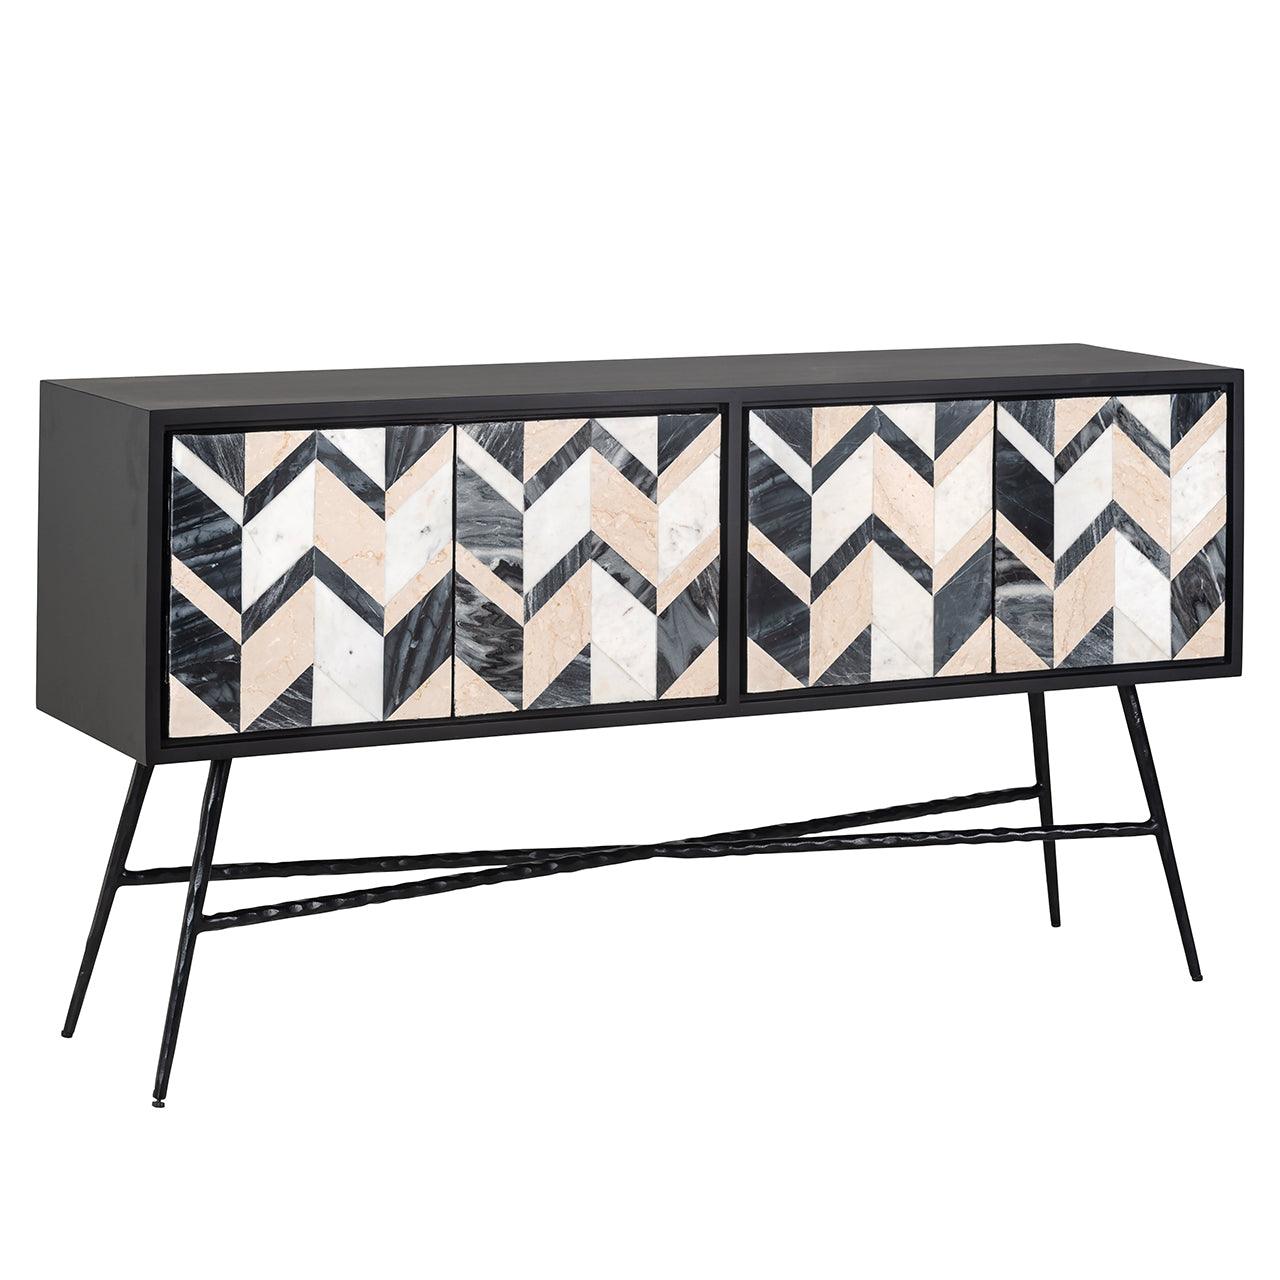 Rostelli 4 Door Mango Wood Sideboard with Black Iron Frame by Richmond Interiors - Maison Rêves UK